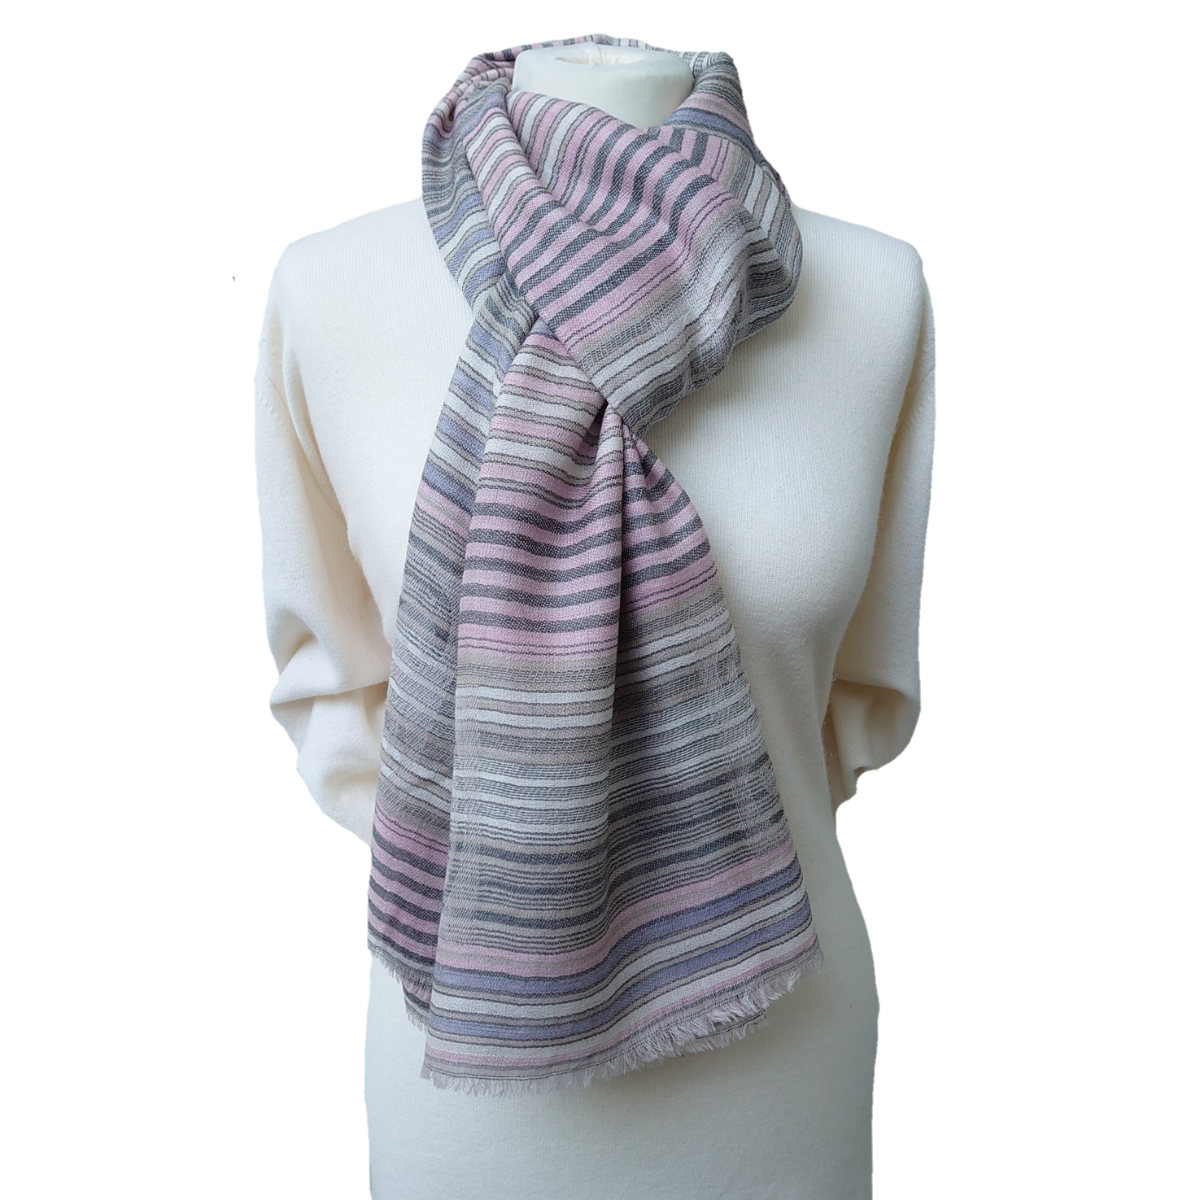 Fine Pashmina Stole - Large Scarf - Grey and Pink Stripes with Paisley Design